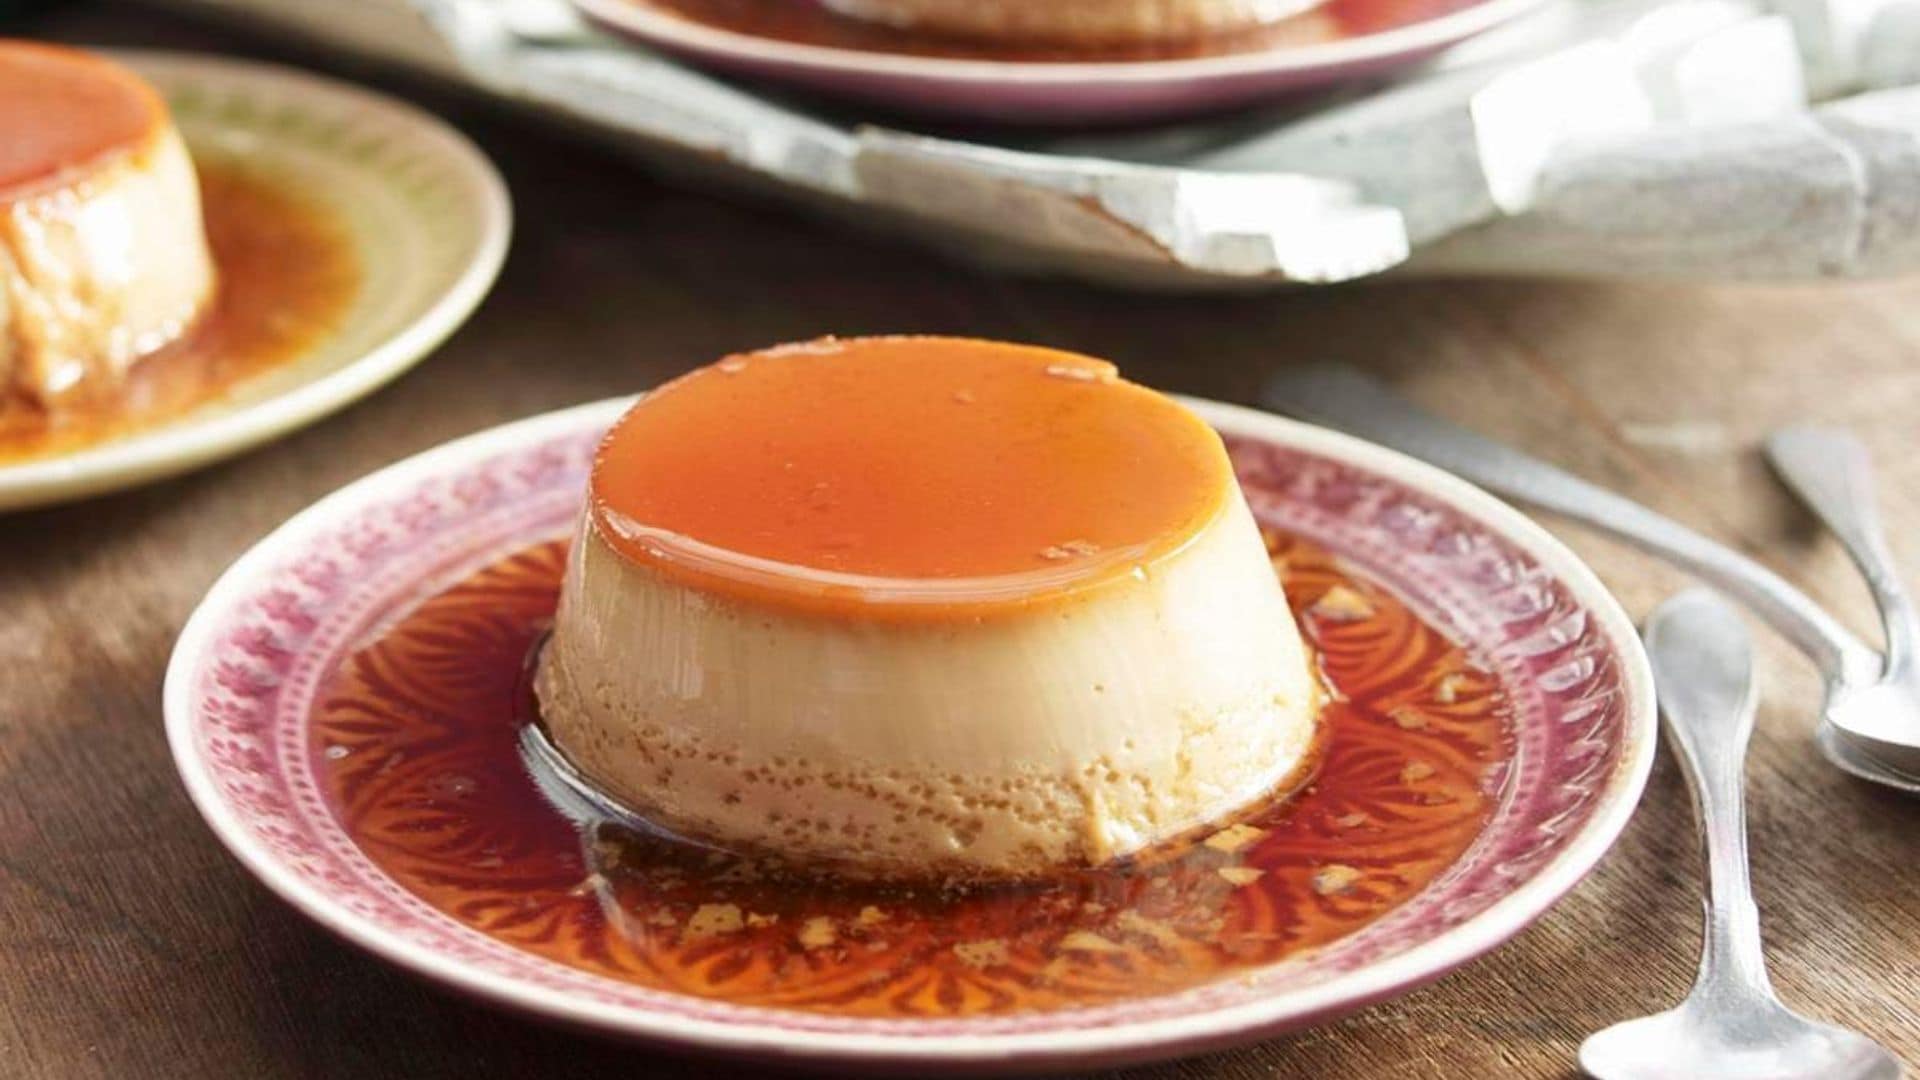 Make your mamá proud with this delicious and creamy flan recipe